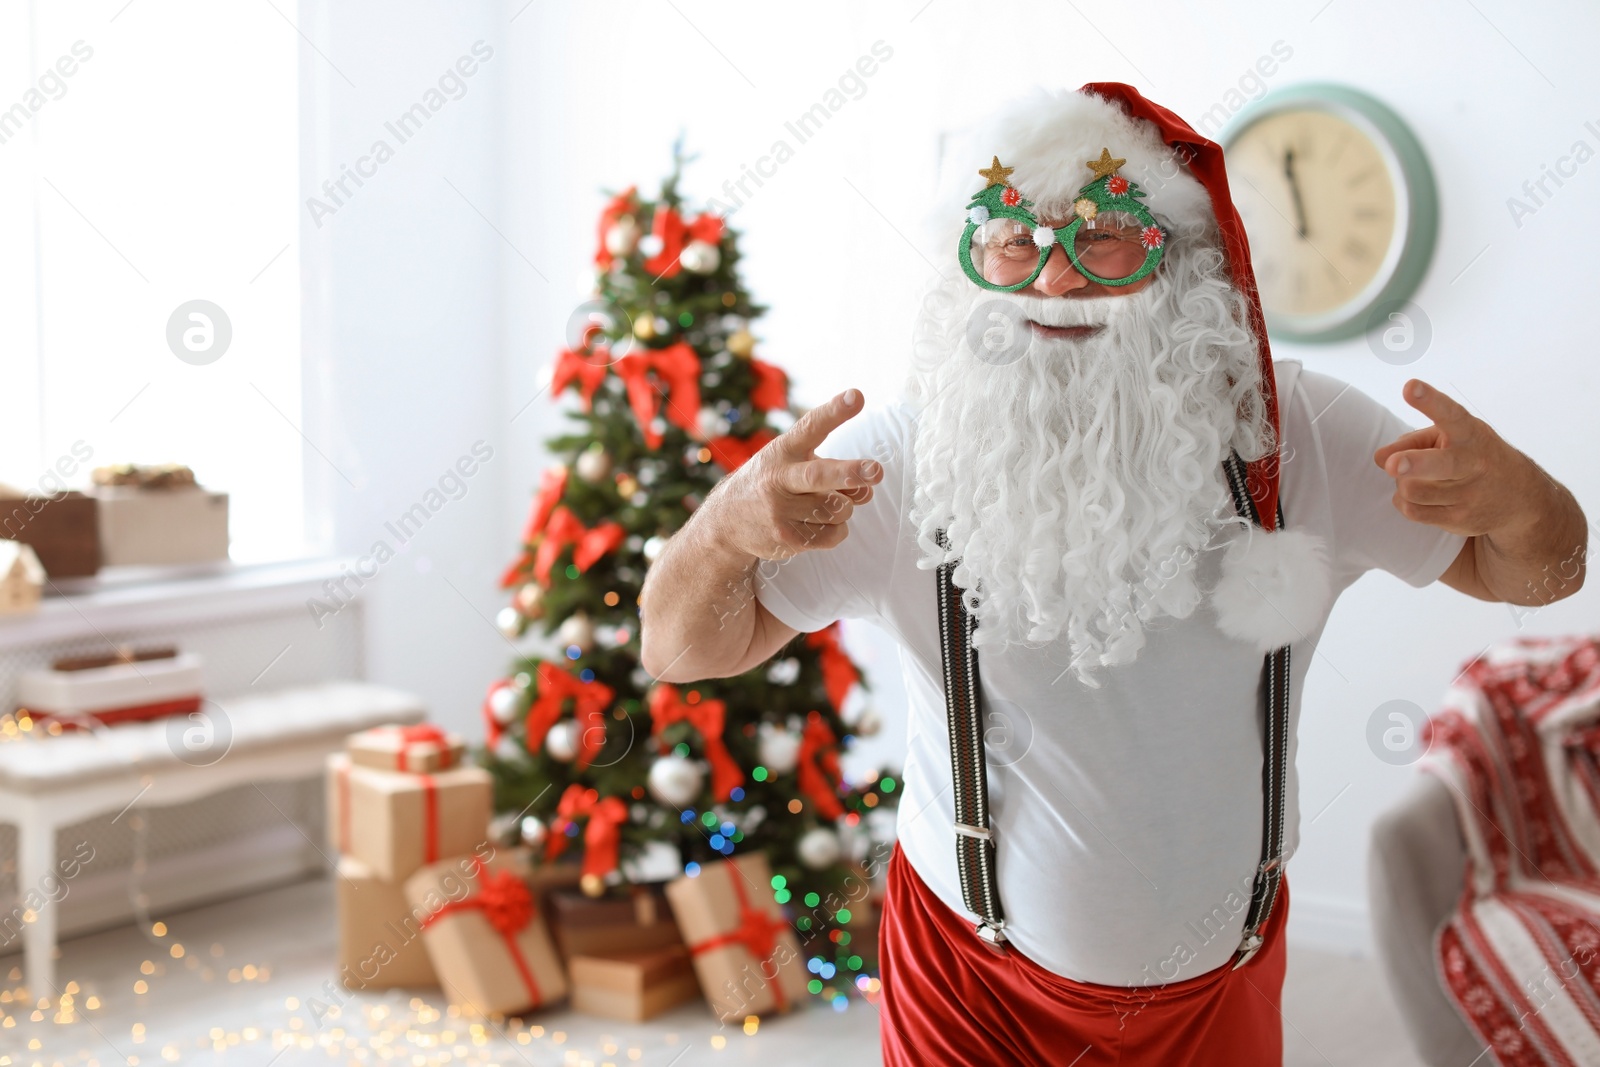 Photo of Authentic Santa Claus with funny glasses indoors